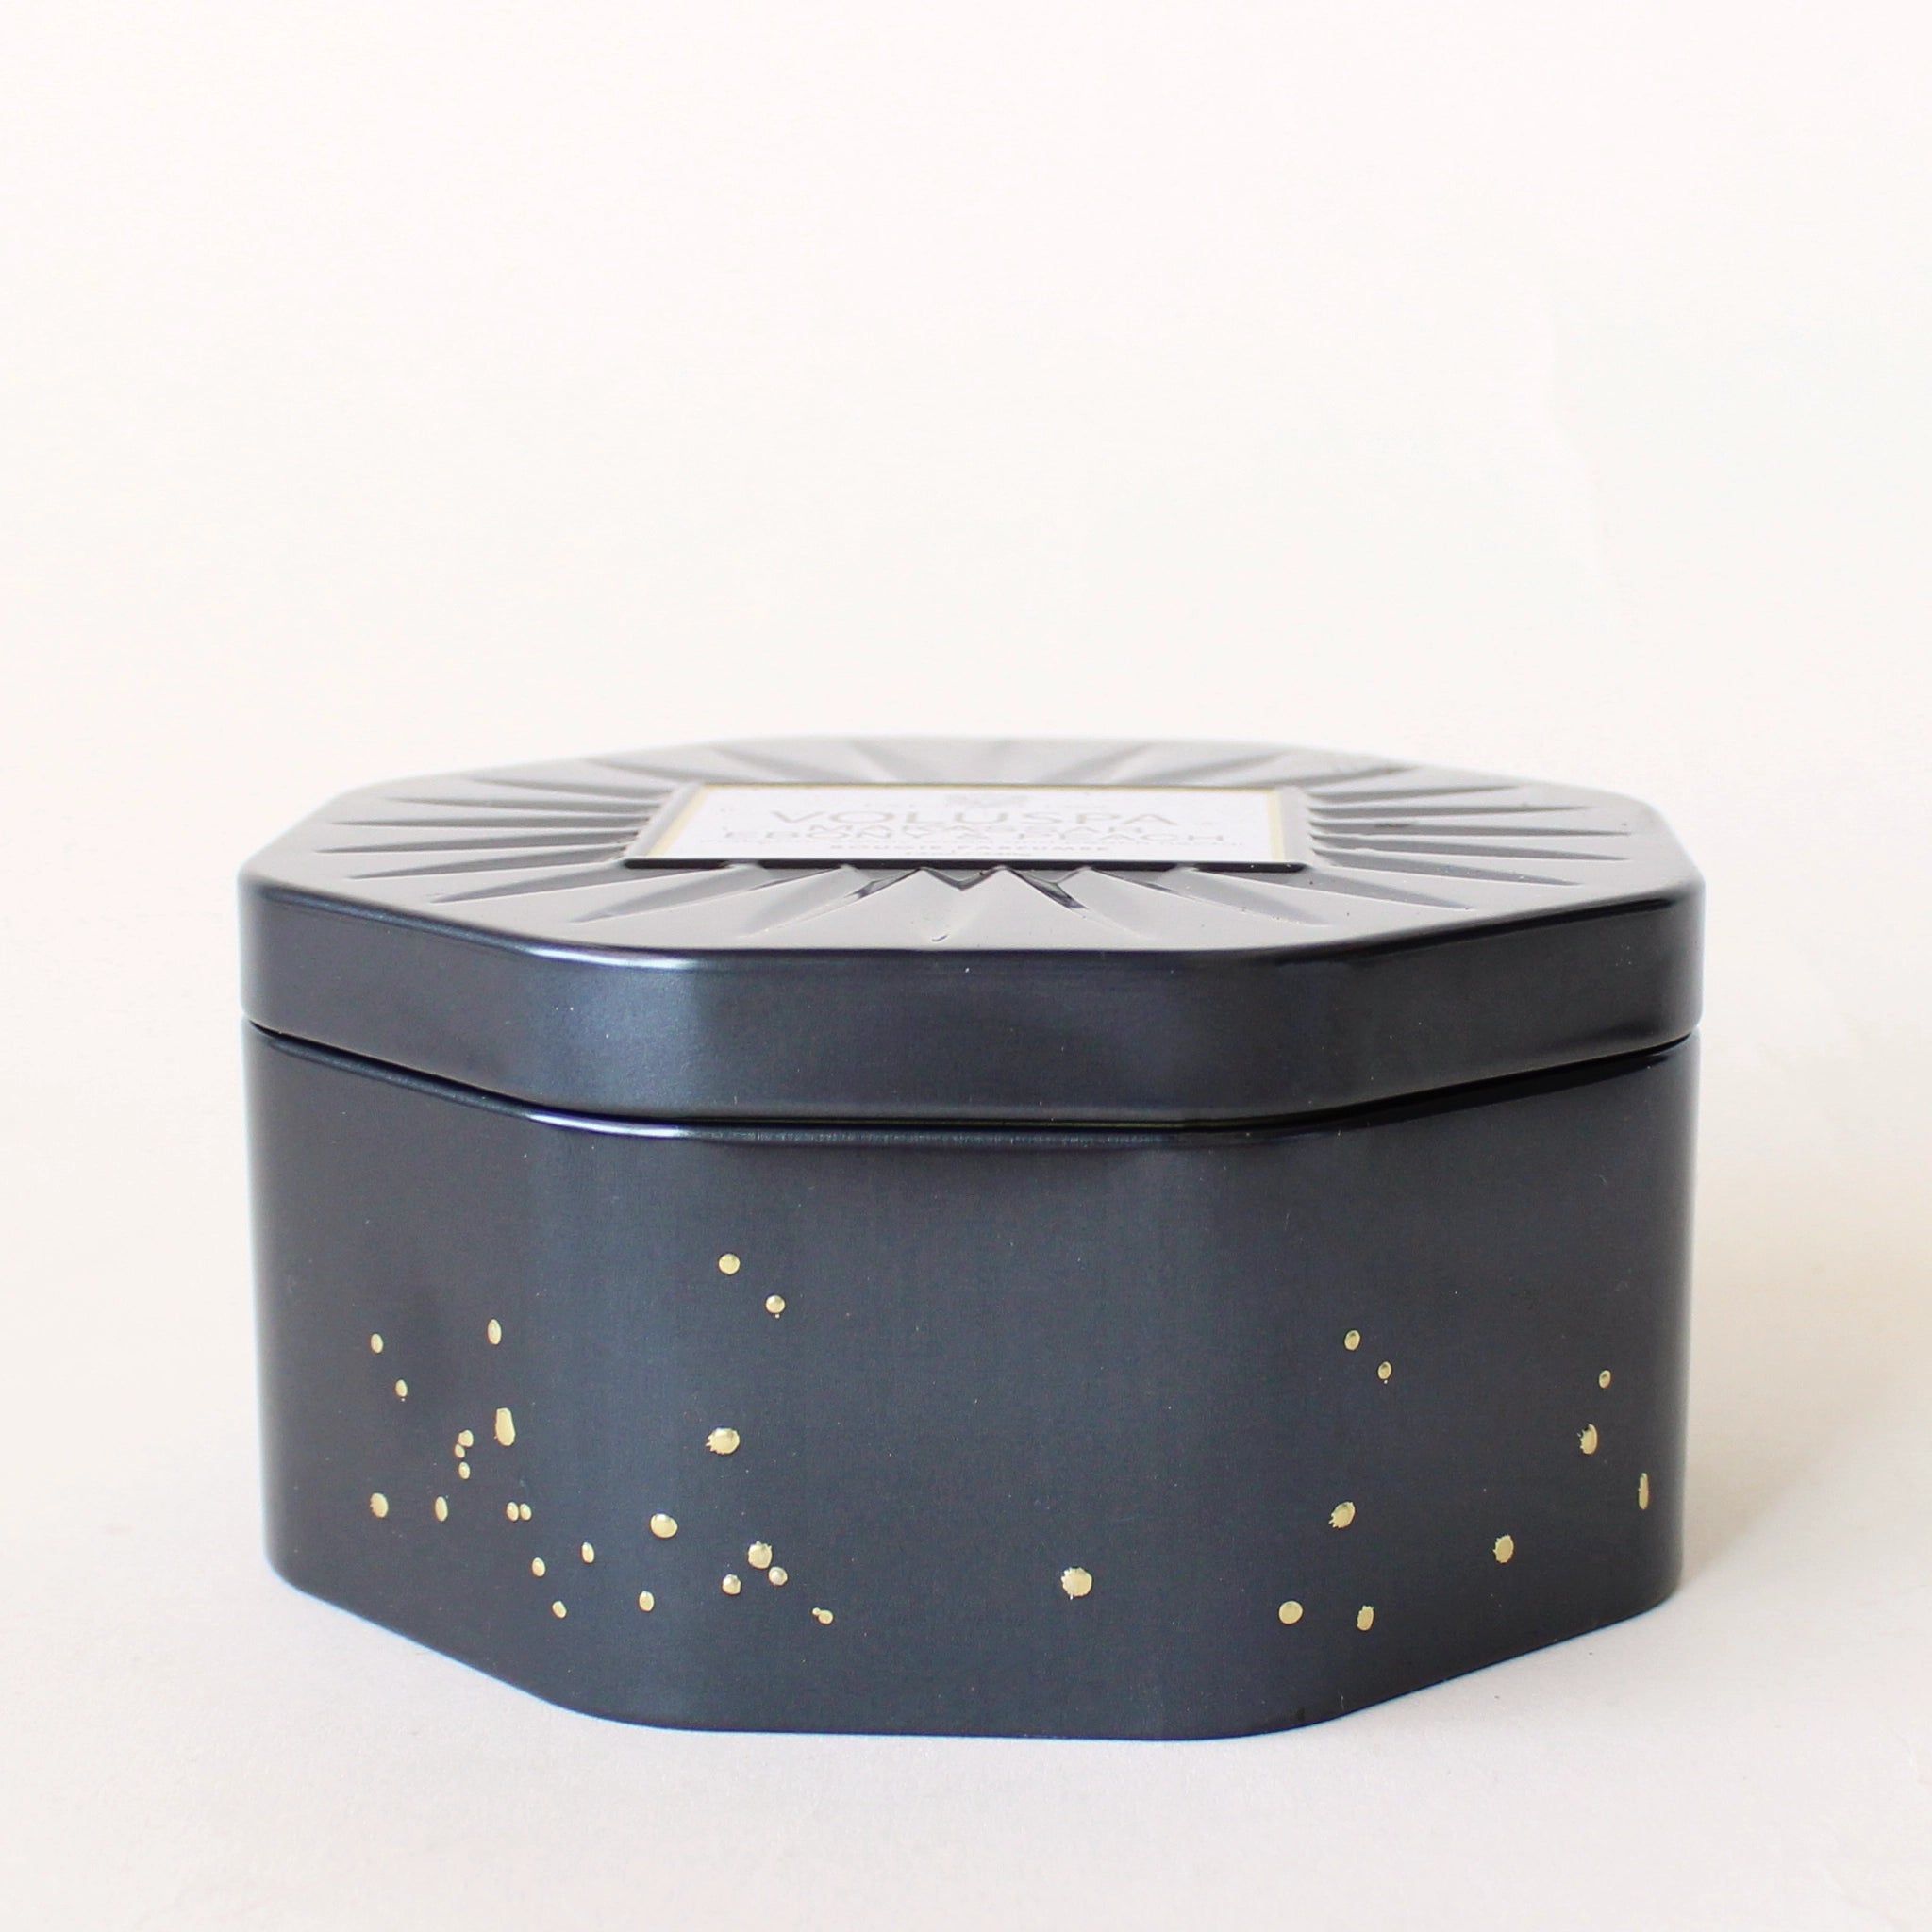 On a white background is an octagon shaped tin candle with three wicks, white wax and small gold speckle detailing.